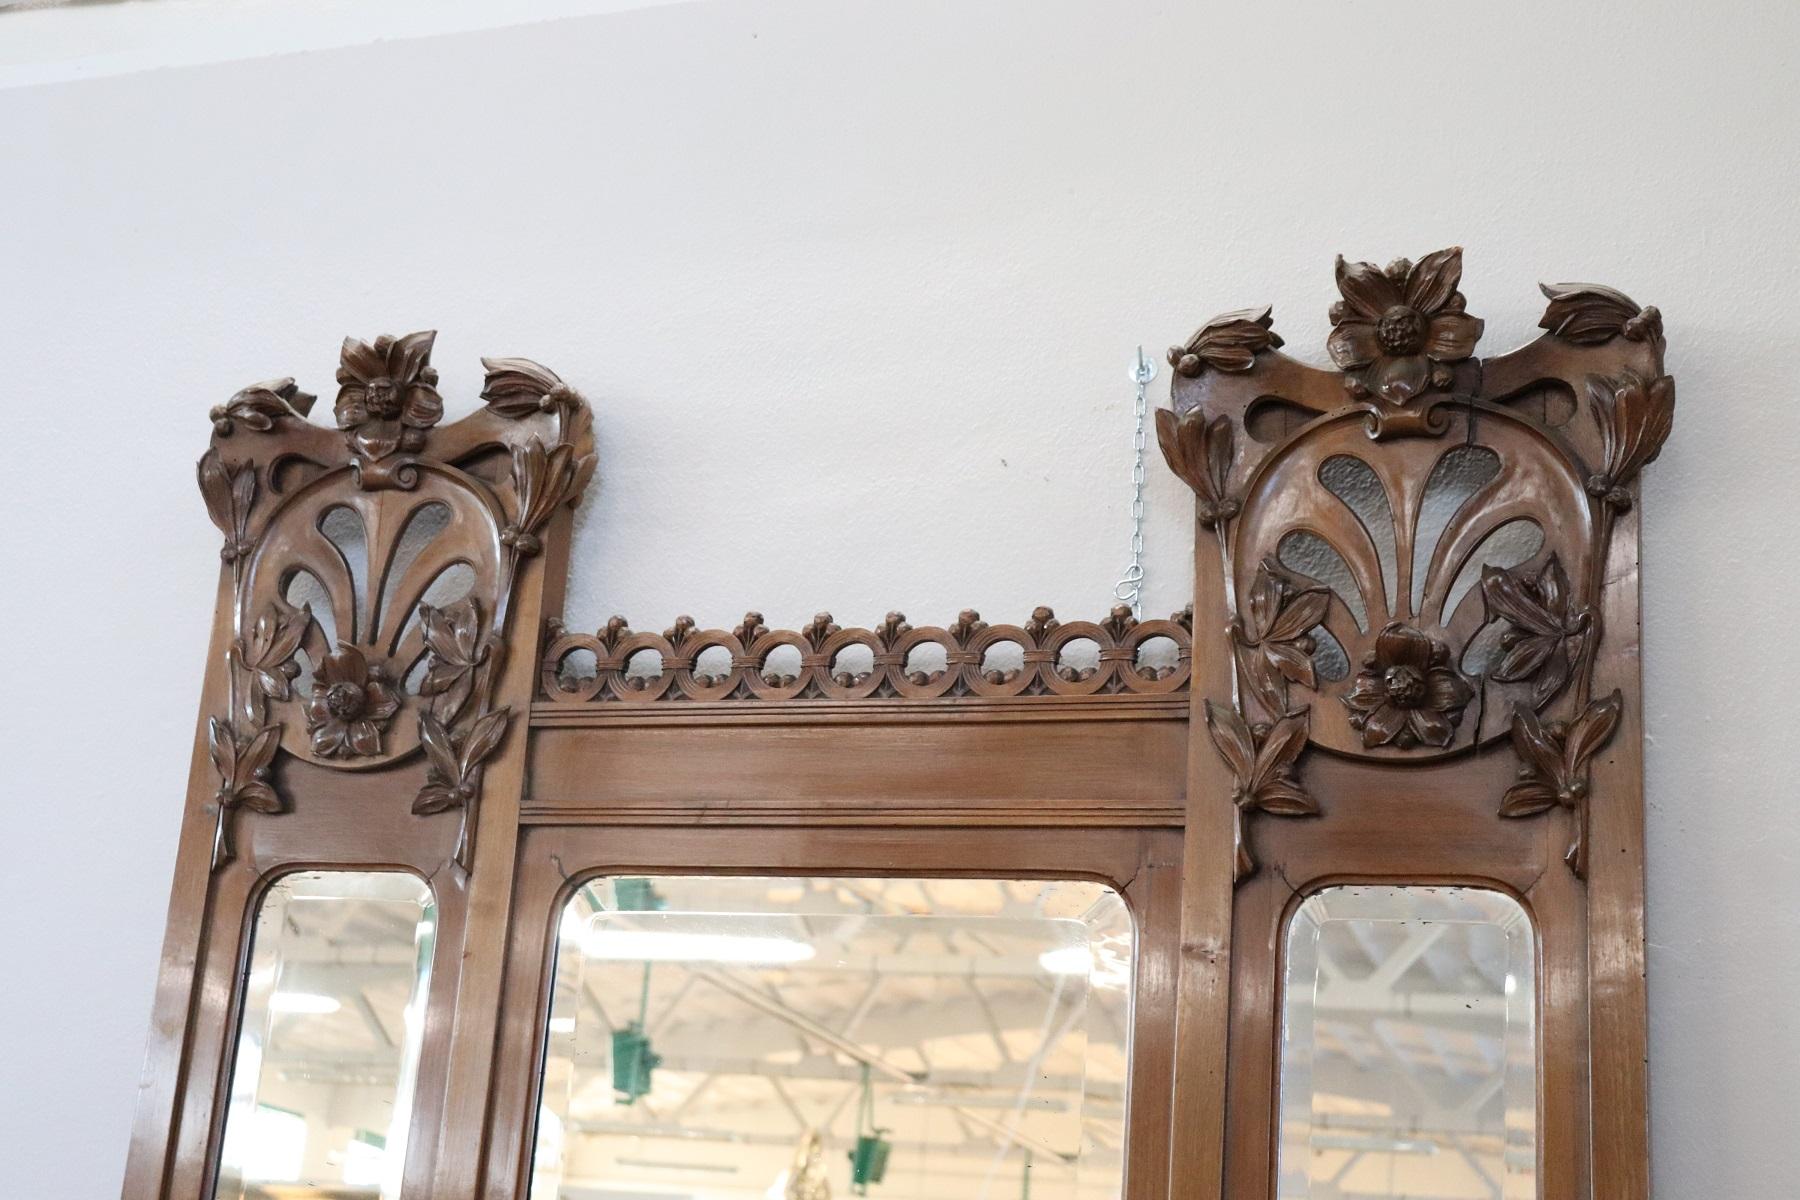 Important and rare antique mirror full period liberty, circa 1920. The mirror is made of solid walnut with a refined carving of floral taste typical of this era. In the lower part a planter compartment for storing vases. This type of mirrors were